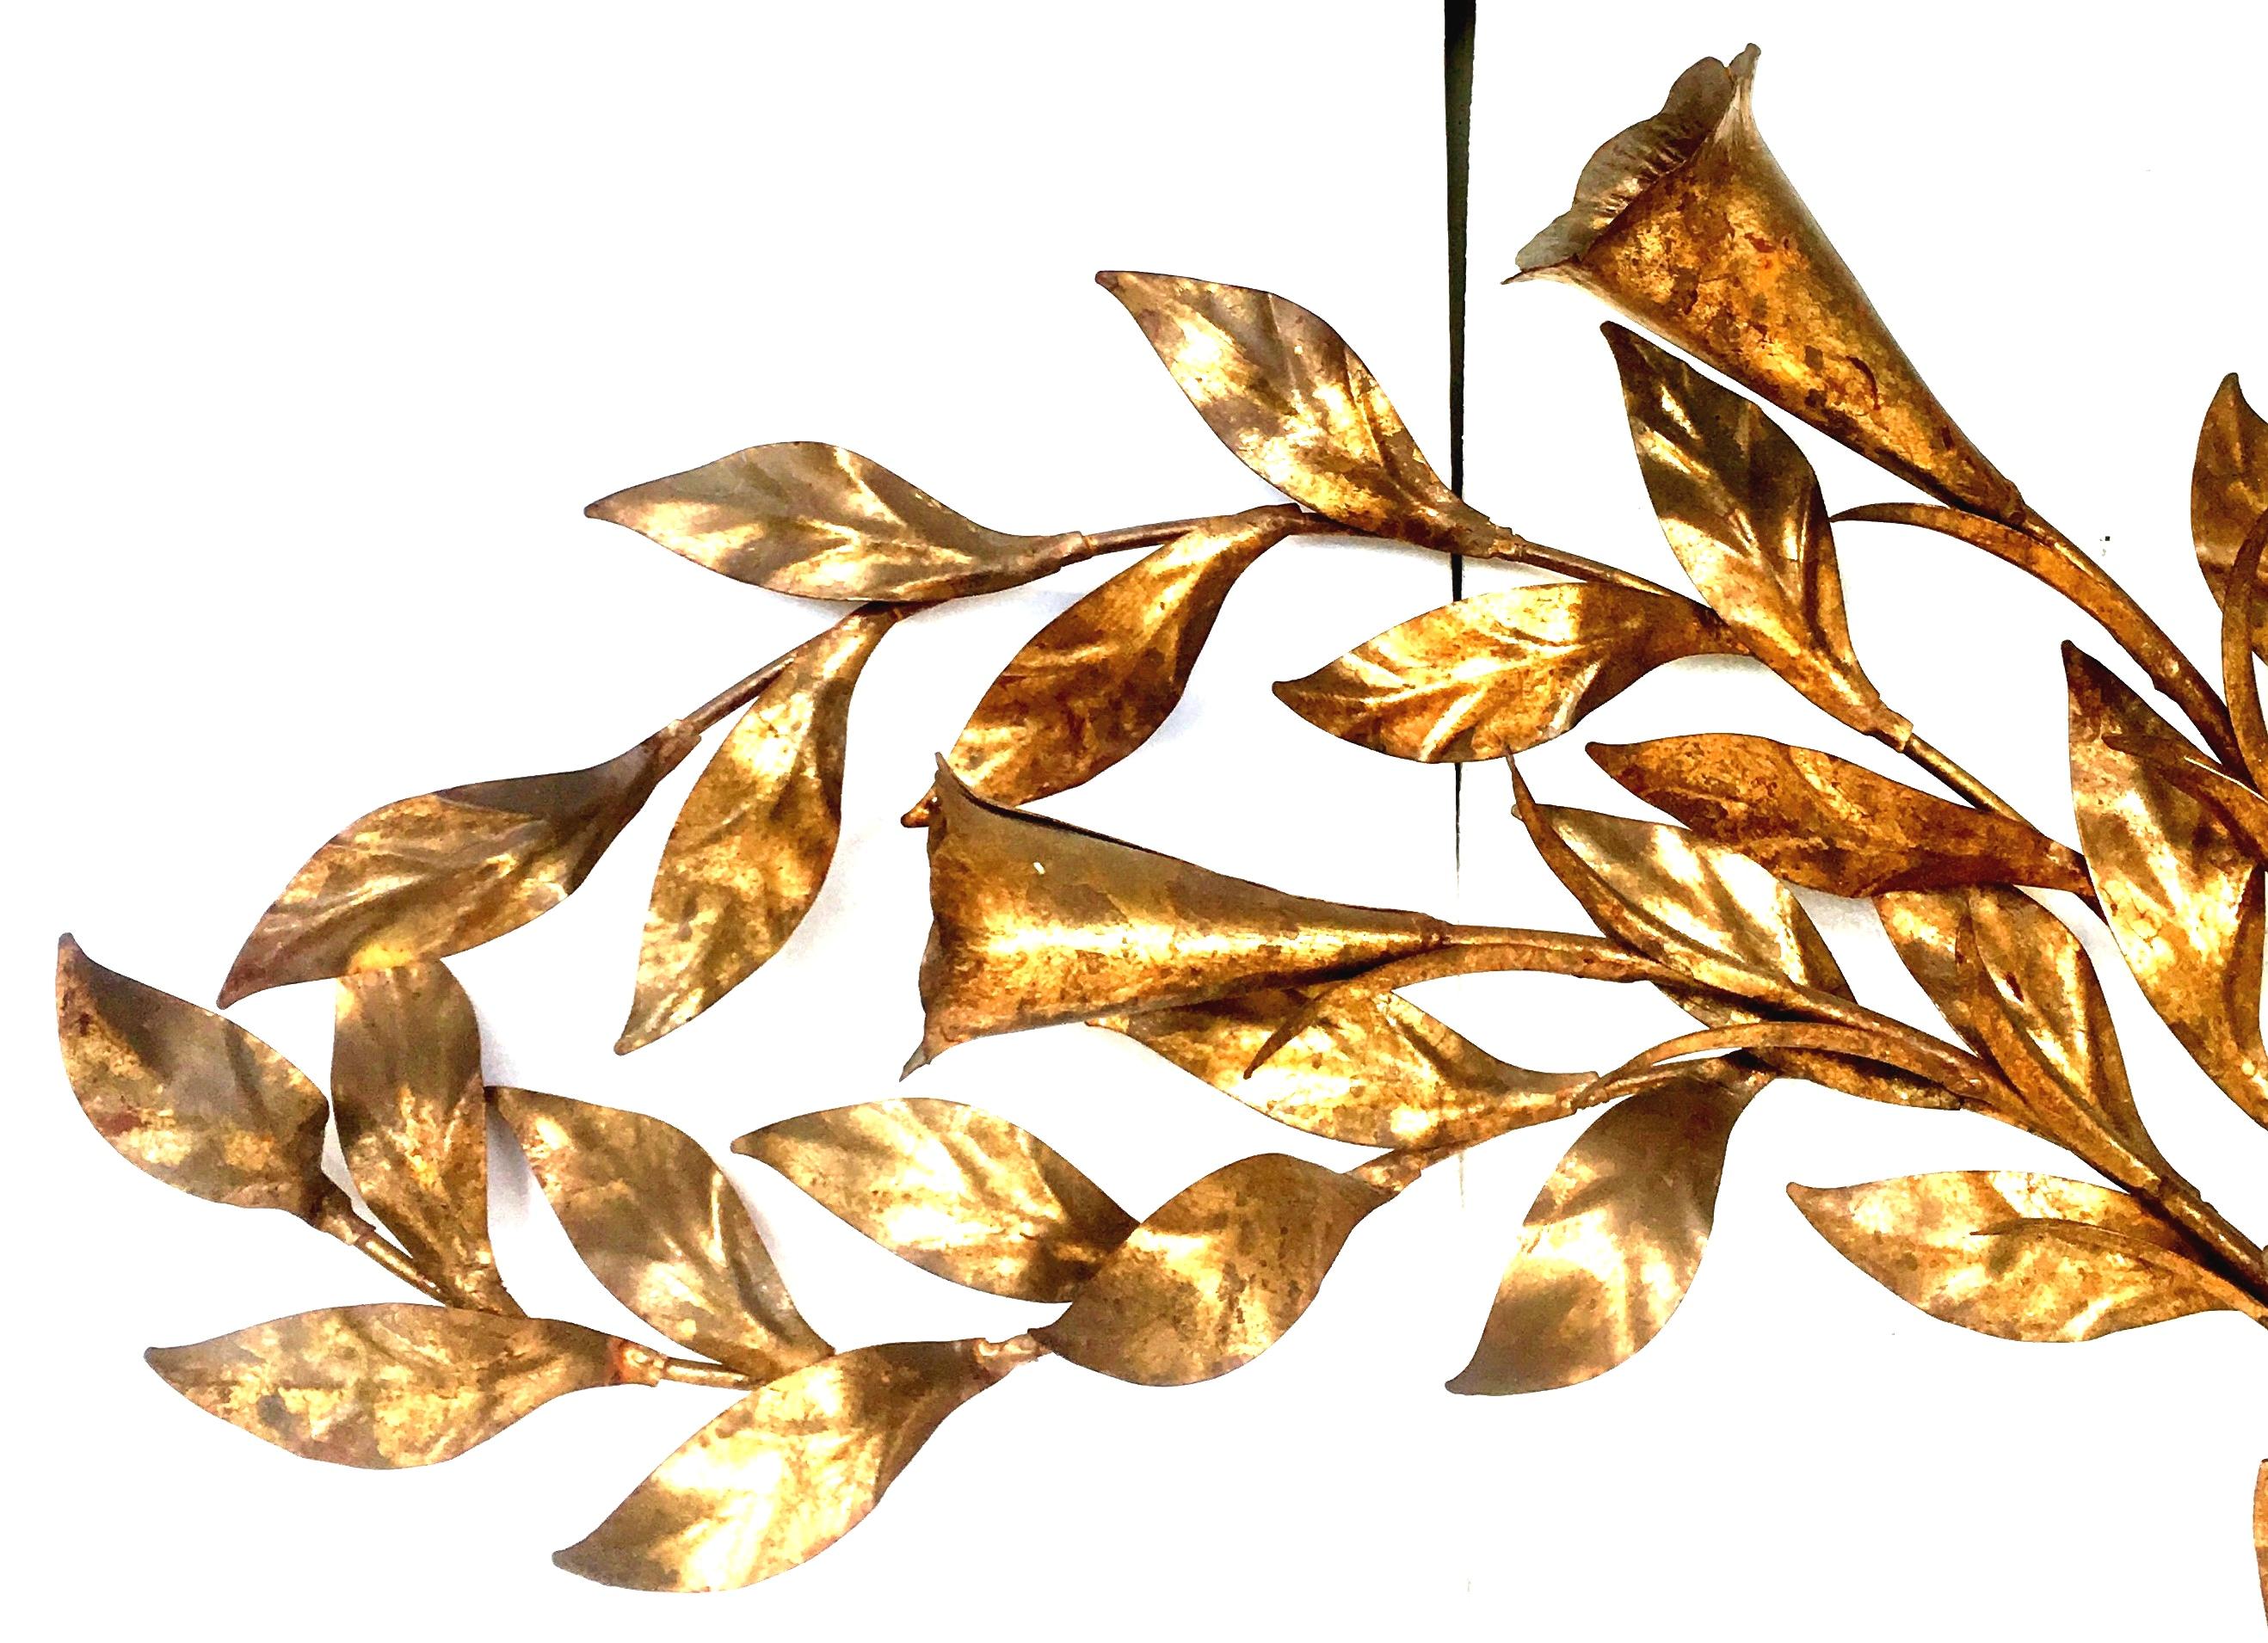 Brass 1950s Monumental Italian Gold Leaf Floral Sheaf Wall Sculpture by Florentia For Sale